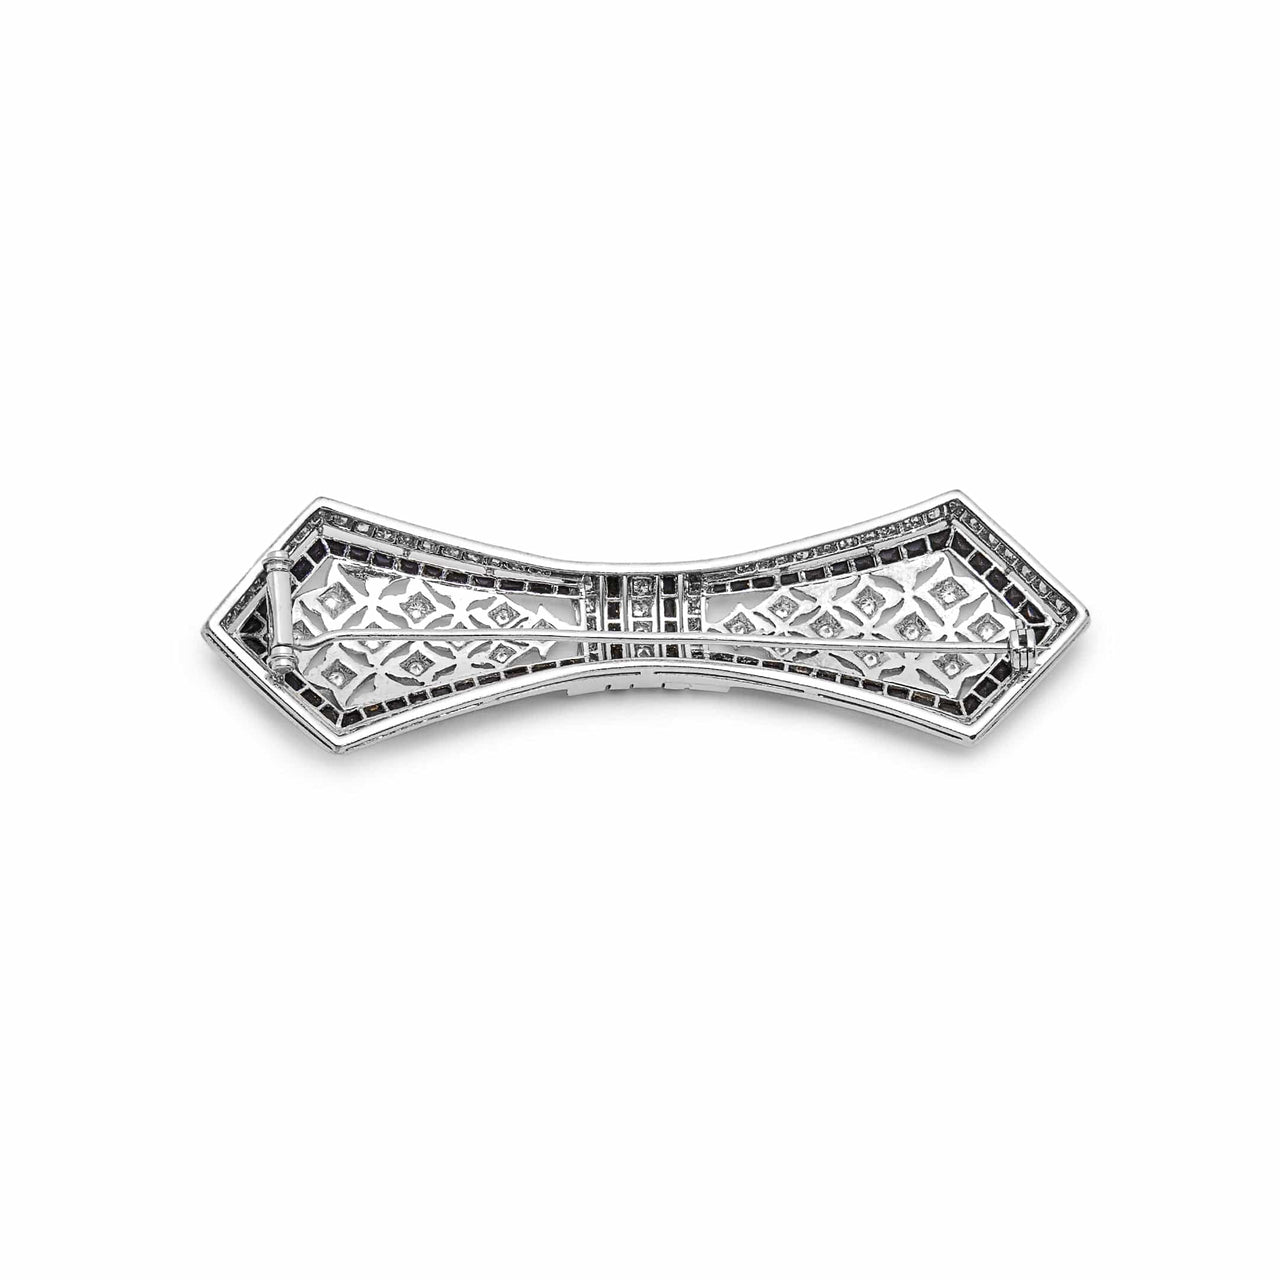 Antique White and Black Diamonds Brooch